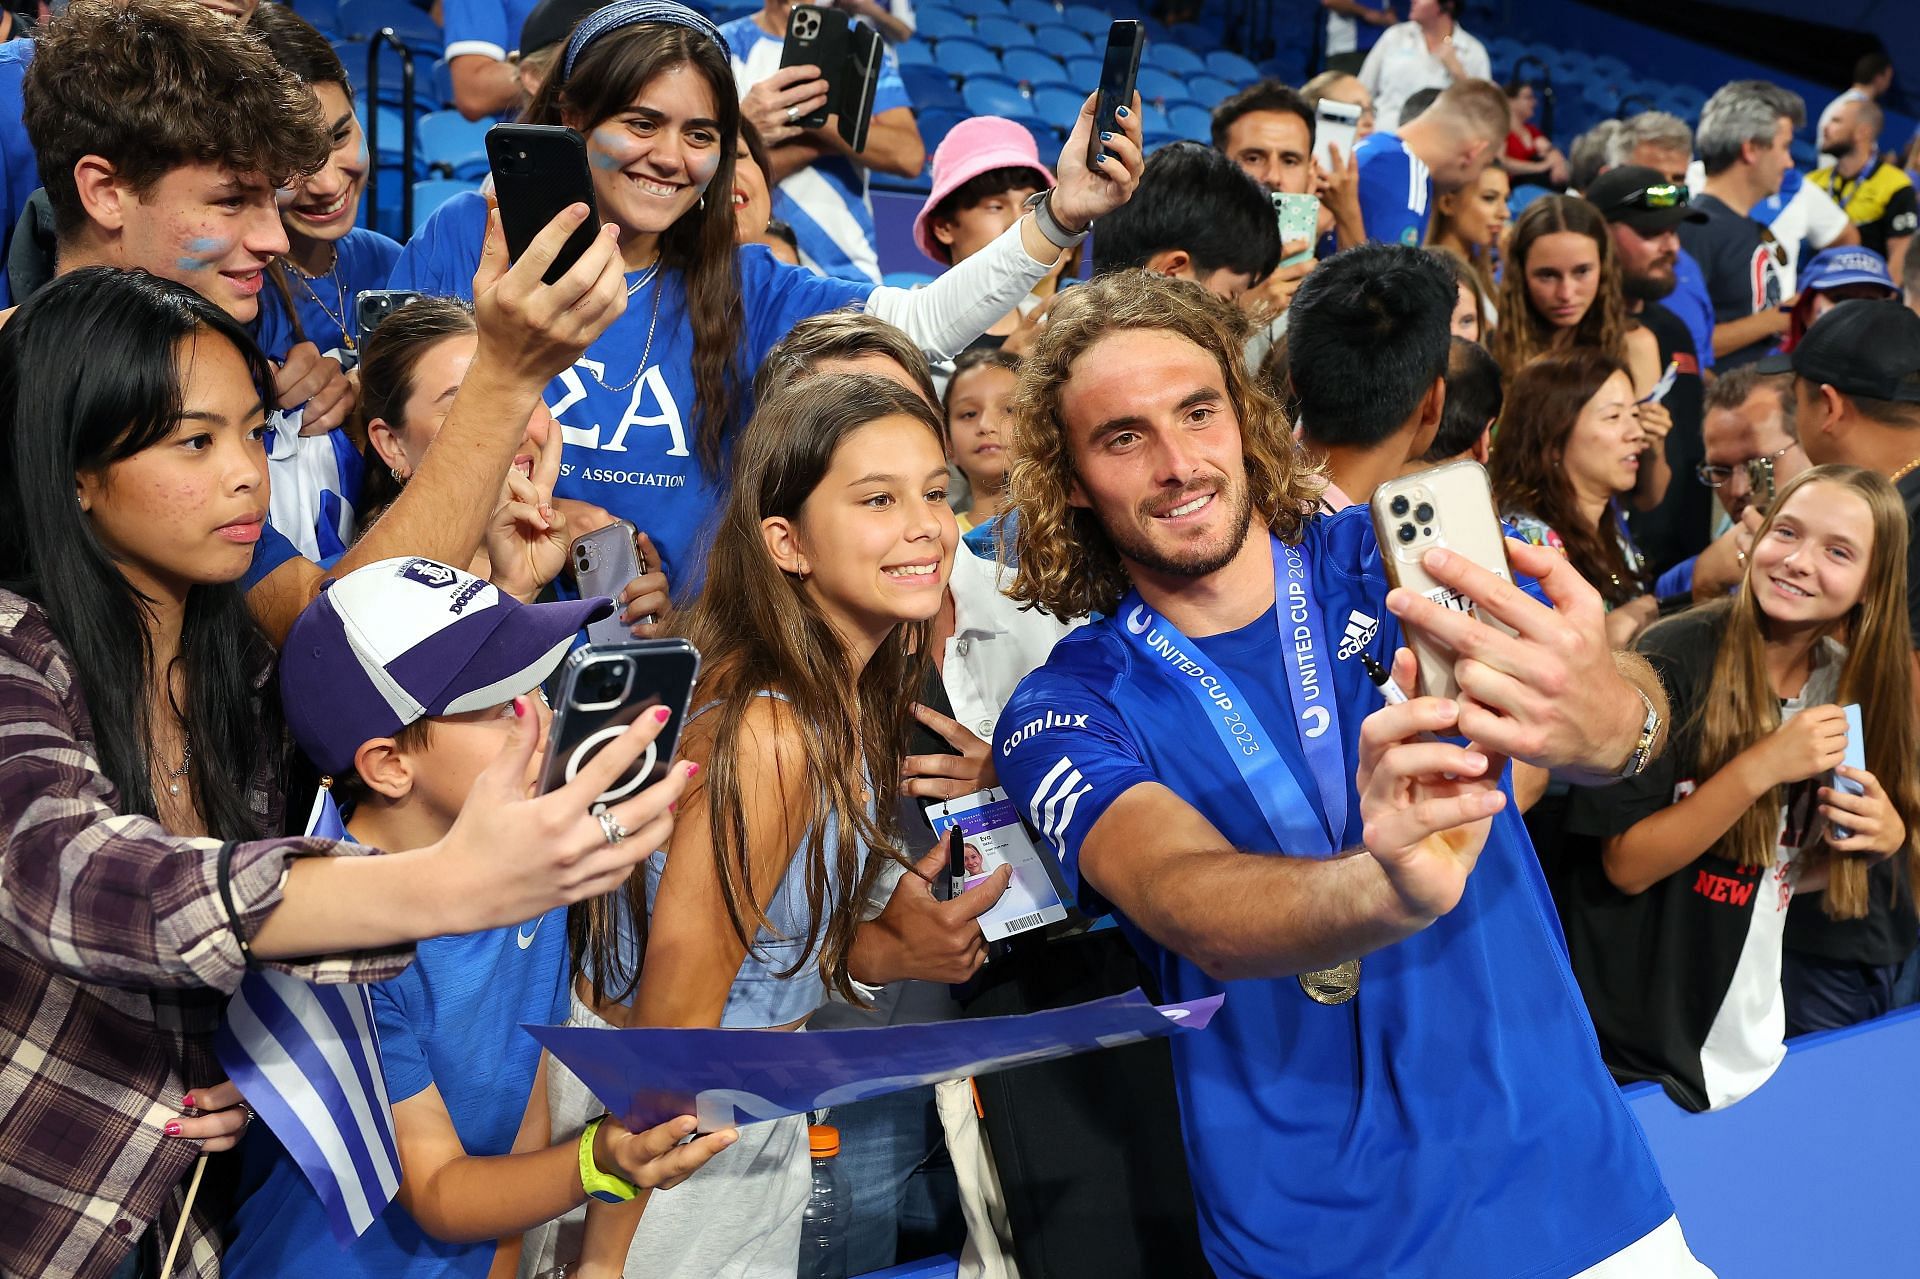 Watch: Stefanos Tsitsipas meets with NGO beneficiaries in Acapulco; signs t-shirts after promising to donate for every ace he scores at the event